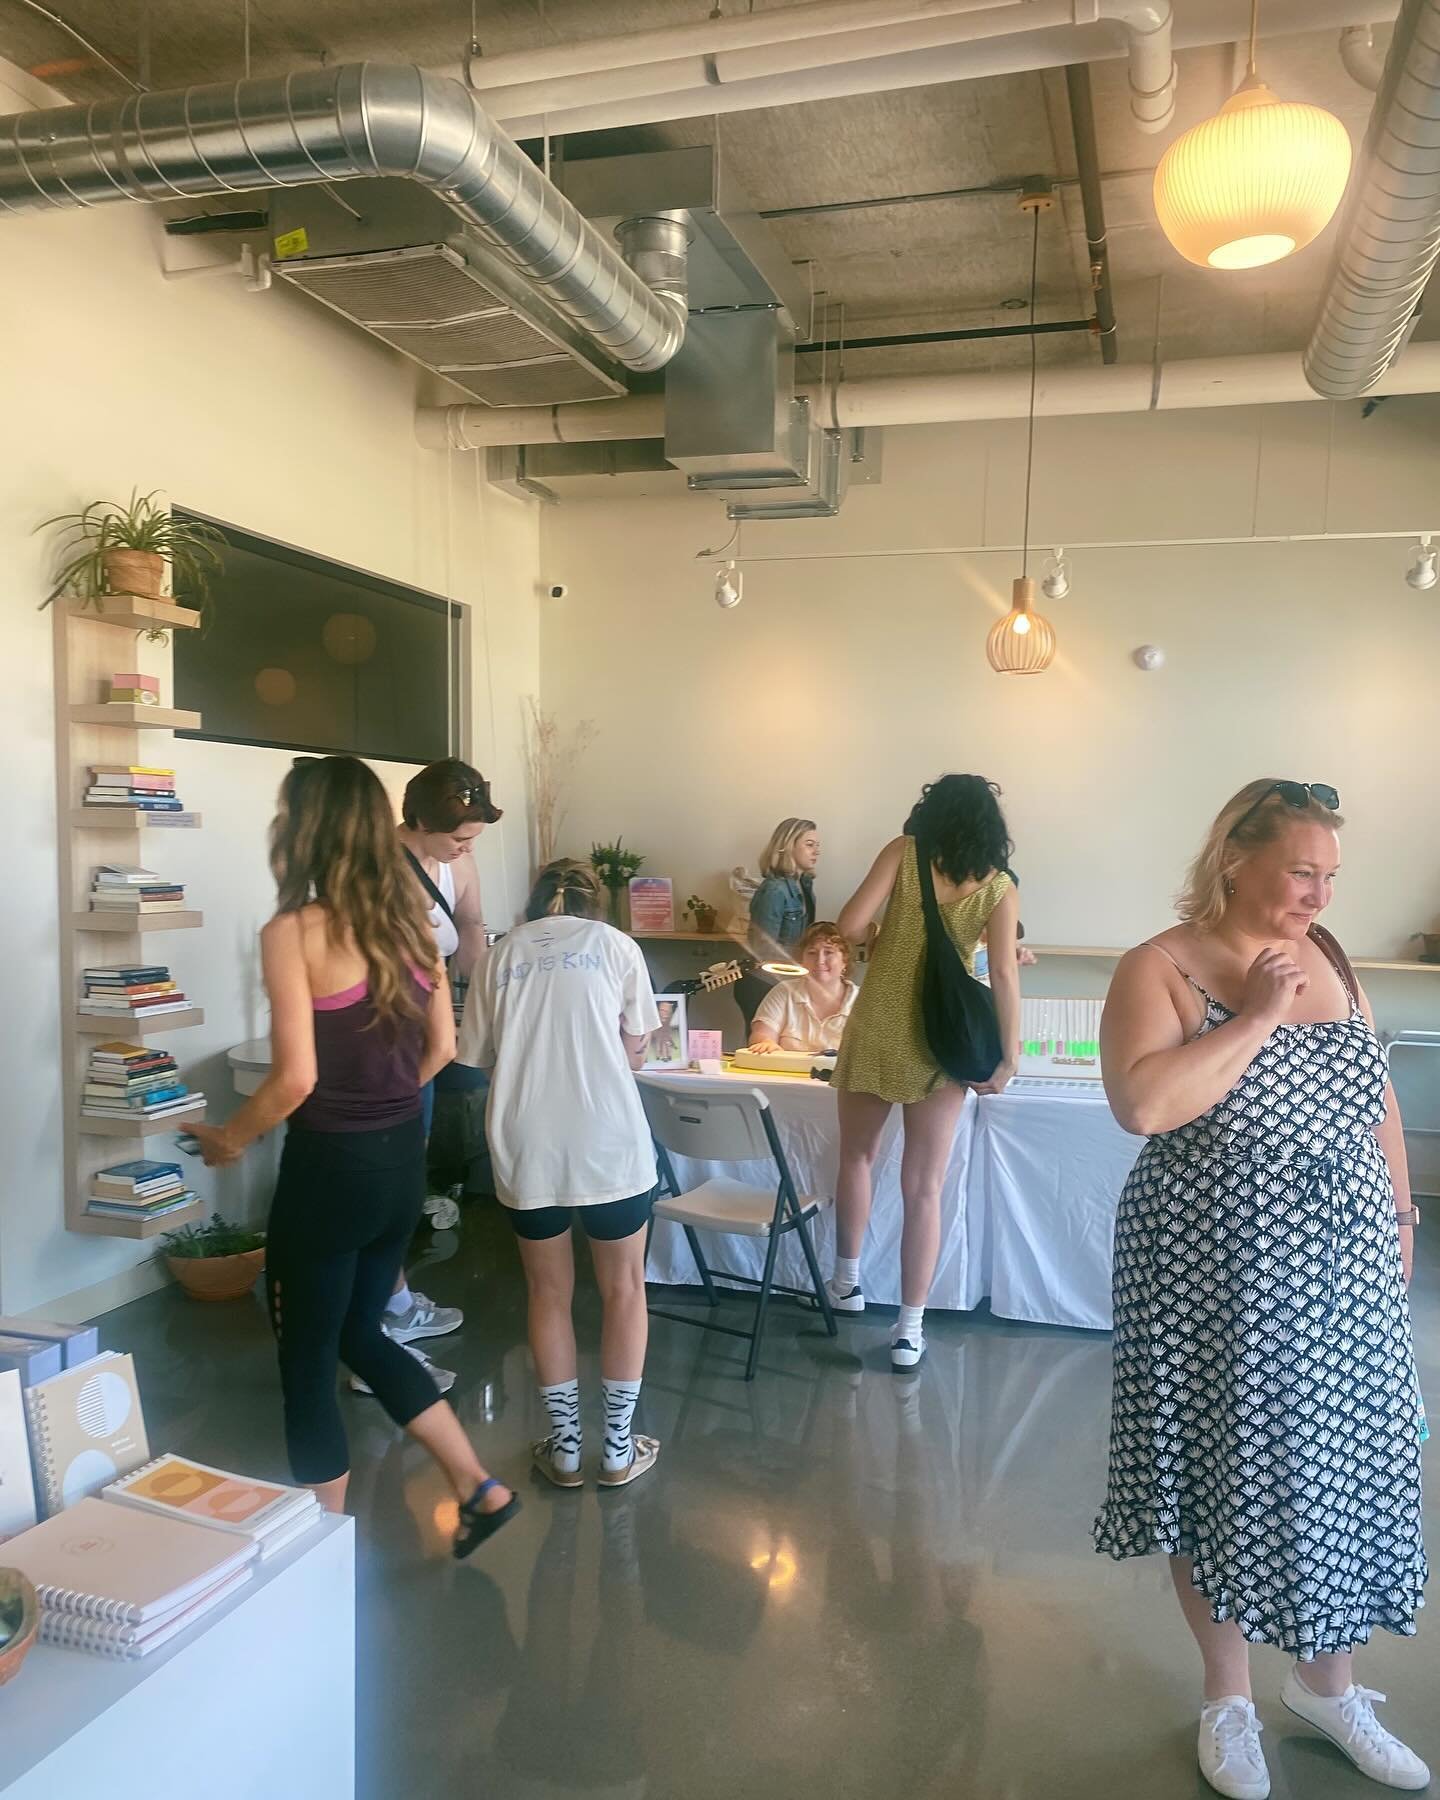 Thanks to everyone who popped in for permanent  jewelry with @linc.mpls 💗🔗😍.

We had so much fun with y&rsquo;all and can&rsquo;t wait to see you for round two tomorrow!

We&rsquo;ll have Yin with live DJ @priasme_ ~ 9am and then brunch catered by